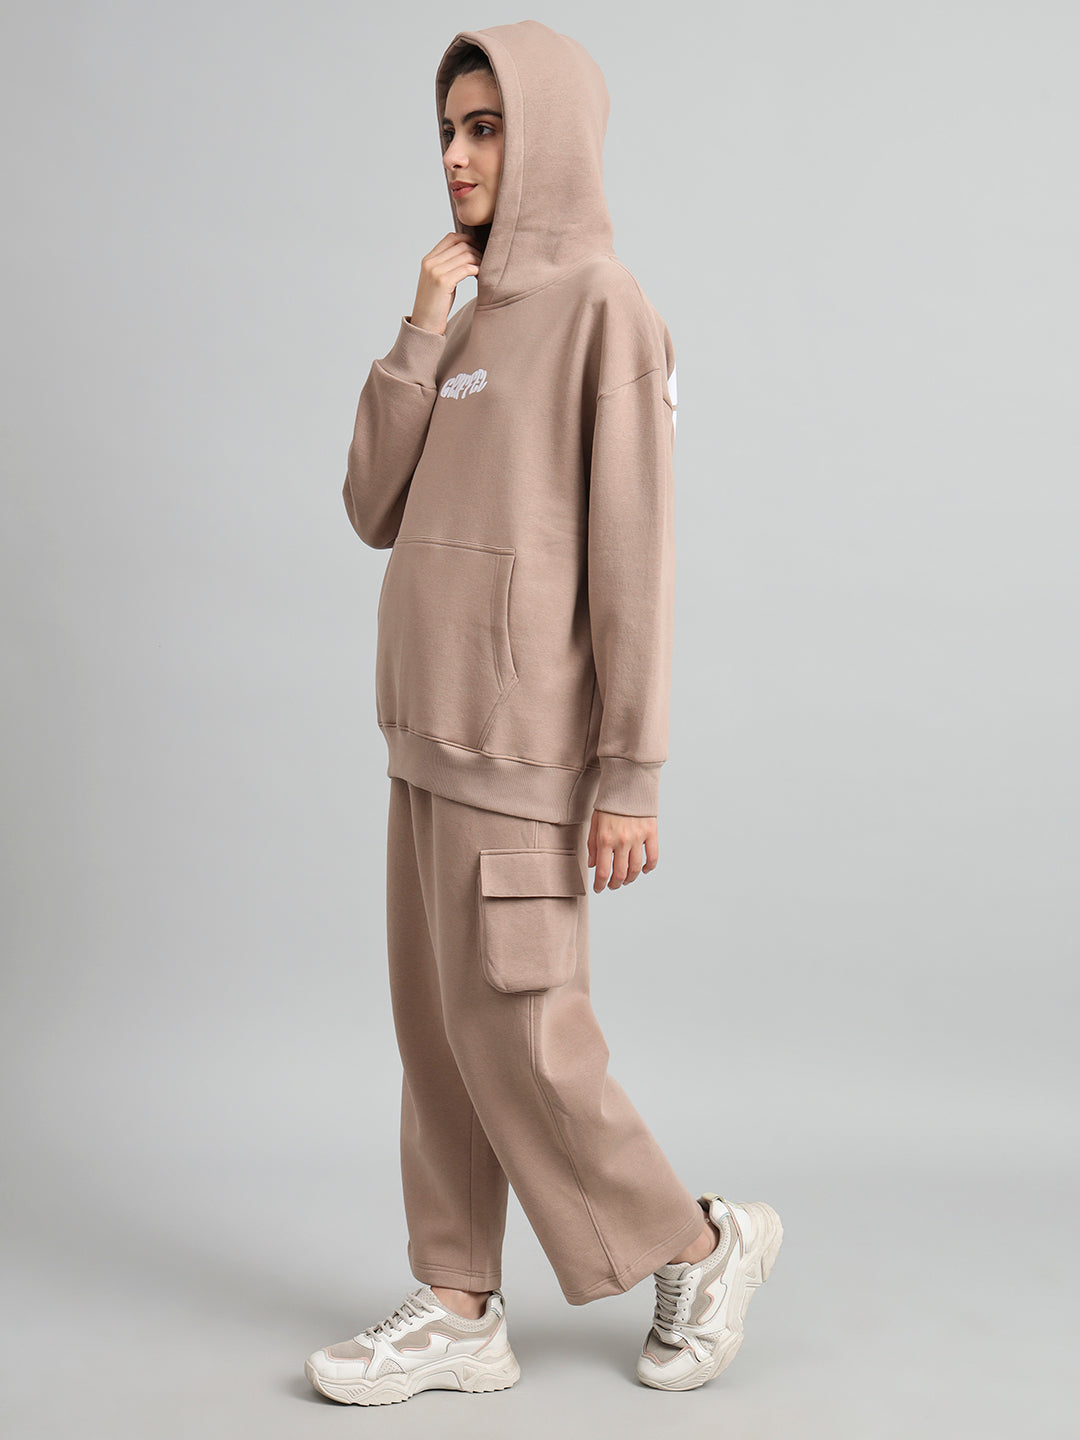 Griffel Women Oversized Fit Absent Minded Print 100% Cotton Camel Fleece Hoodie and trackpant - griffel